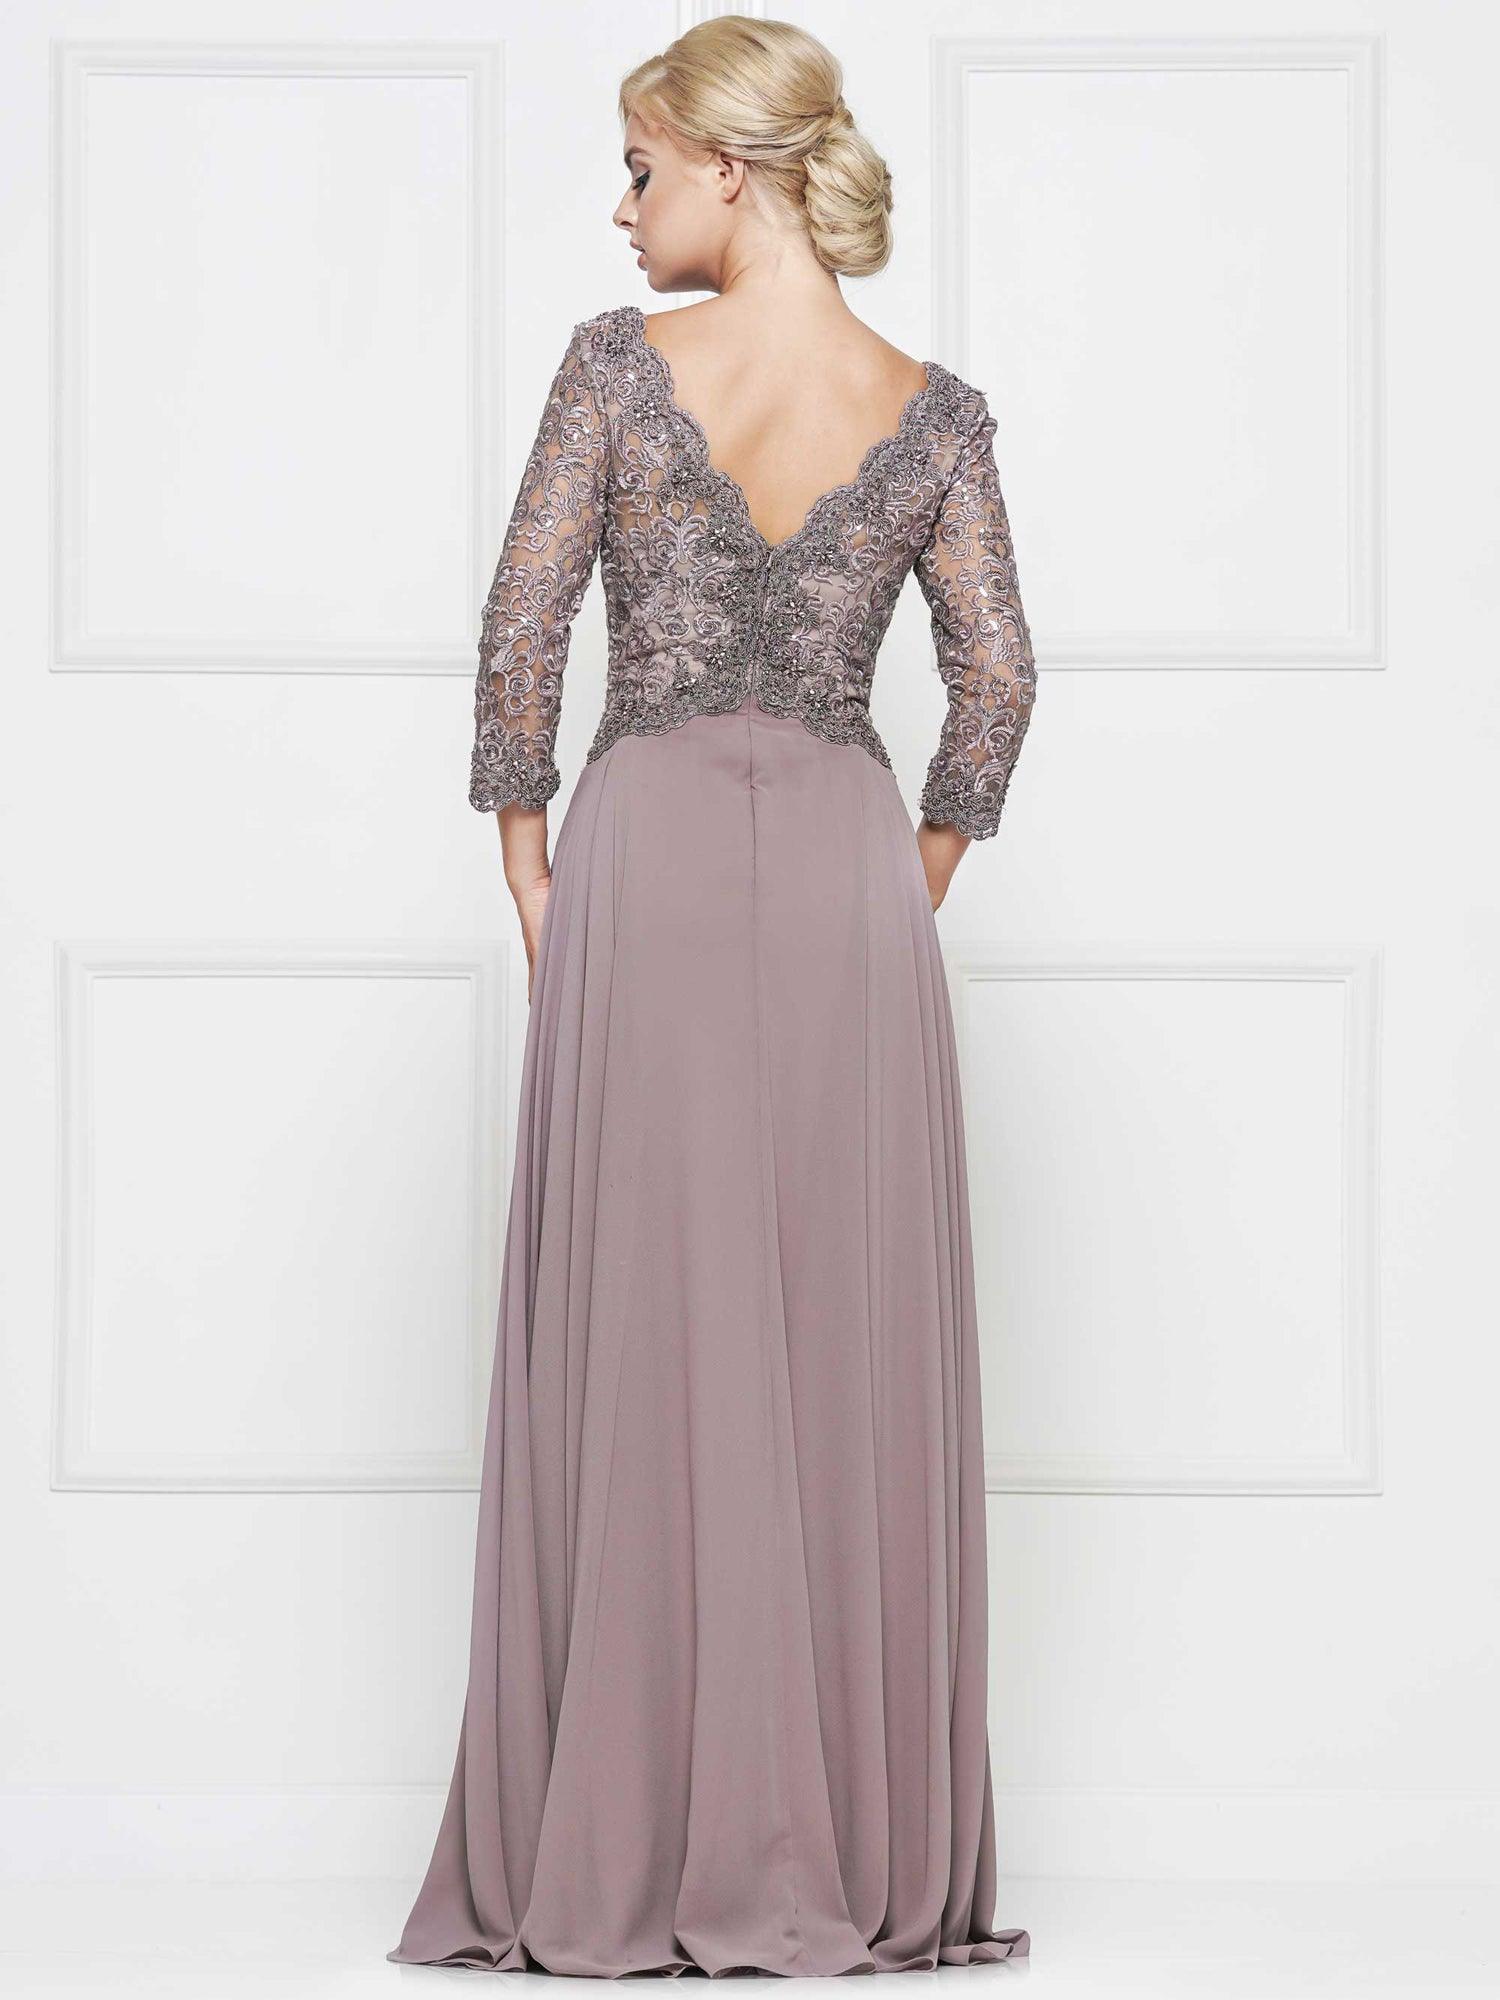 Marsoni Long Mother of the Bride Lace Dress 225 Sale - The Dress Outlet